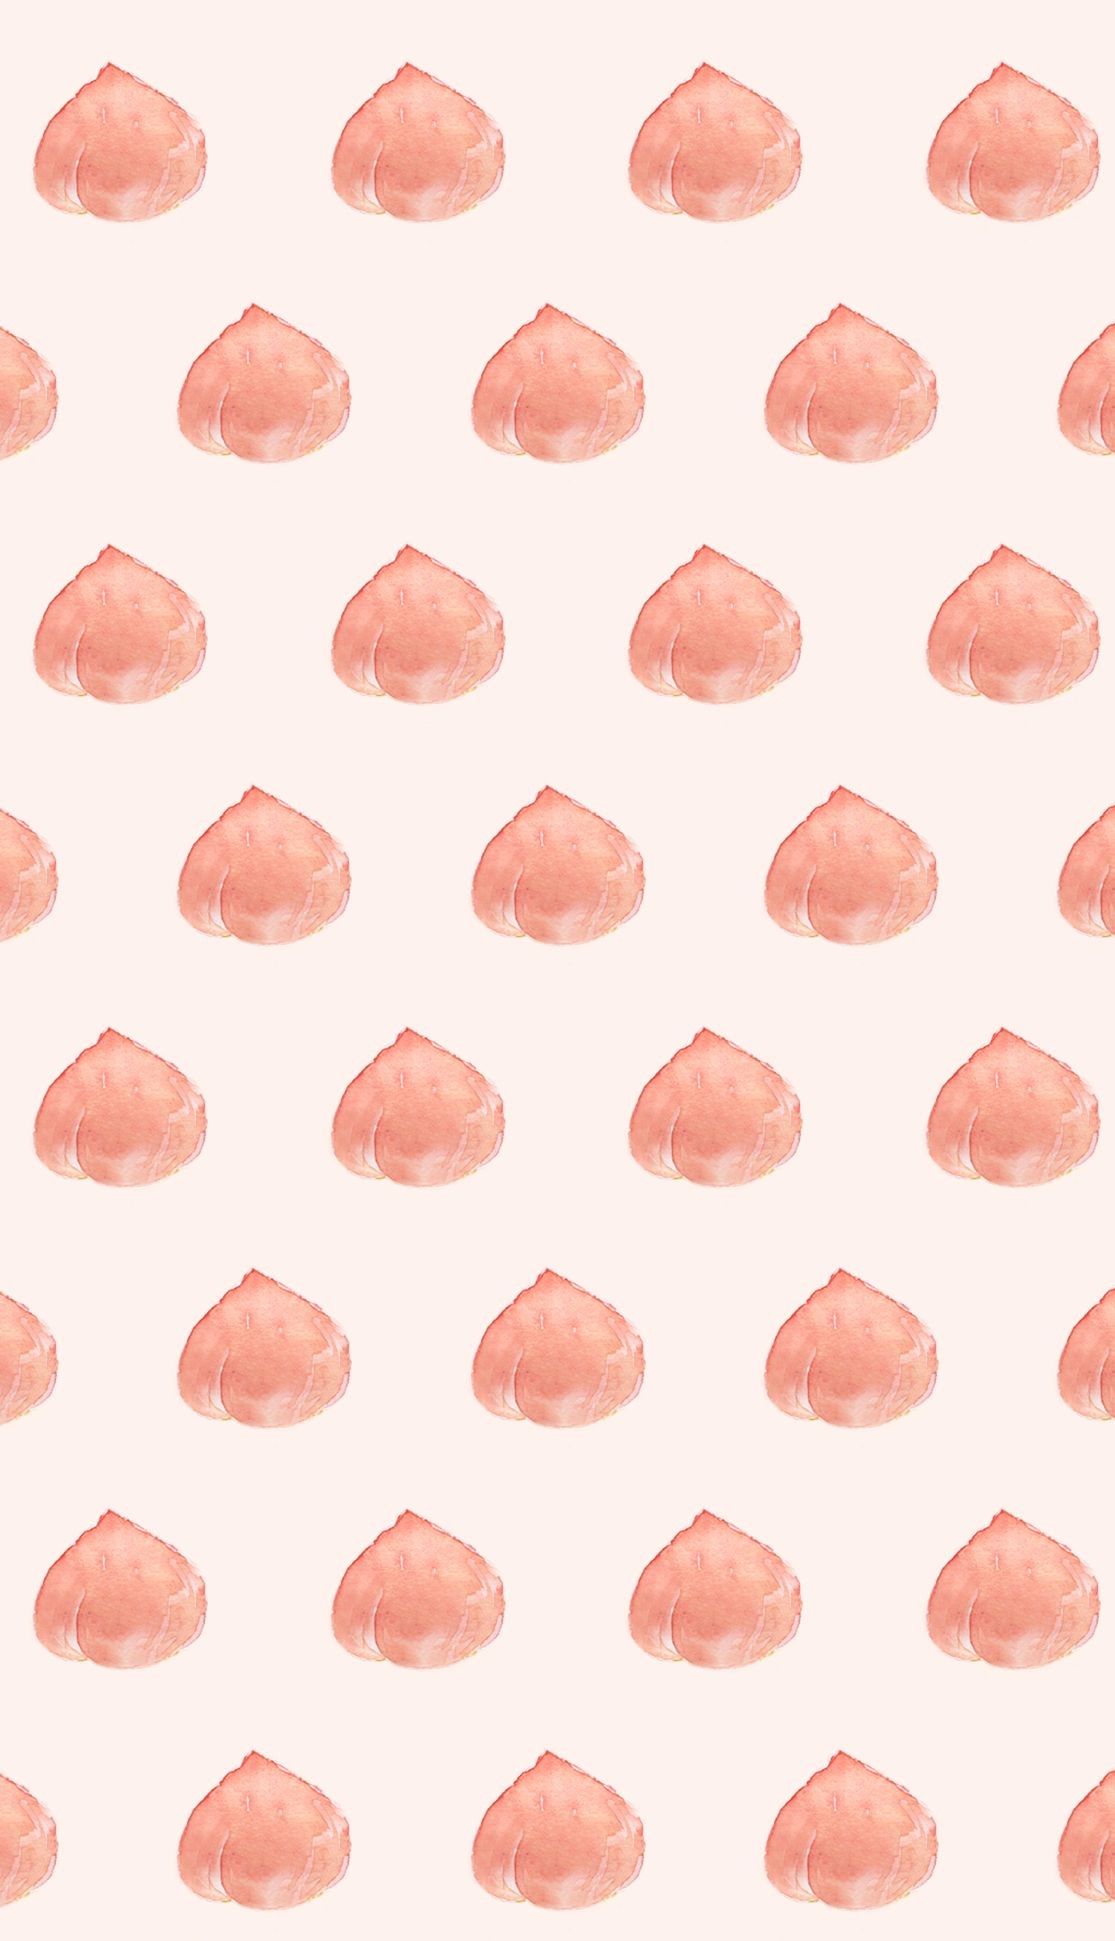 Peach Background Images  Free iPhone  Zoom HD Wallpapers  Vectors   rawpixel